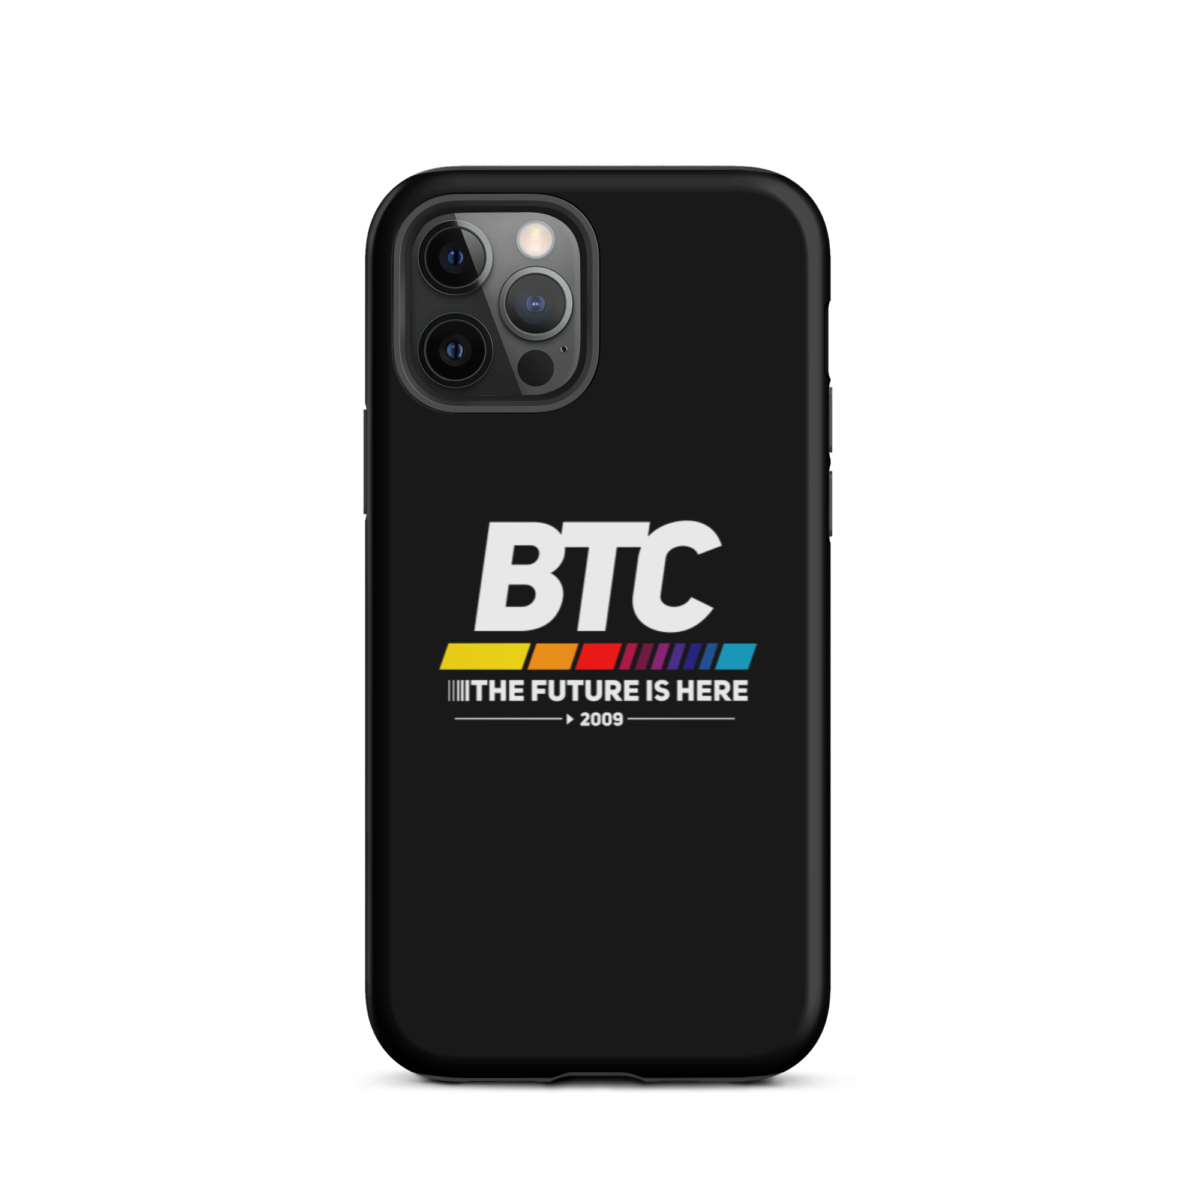 tough iphone case glossy iphone 12 pro front 6345d56a31172 - BTC: The Future Is Here Tough iPhone Case